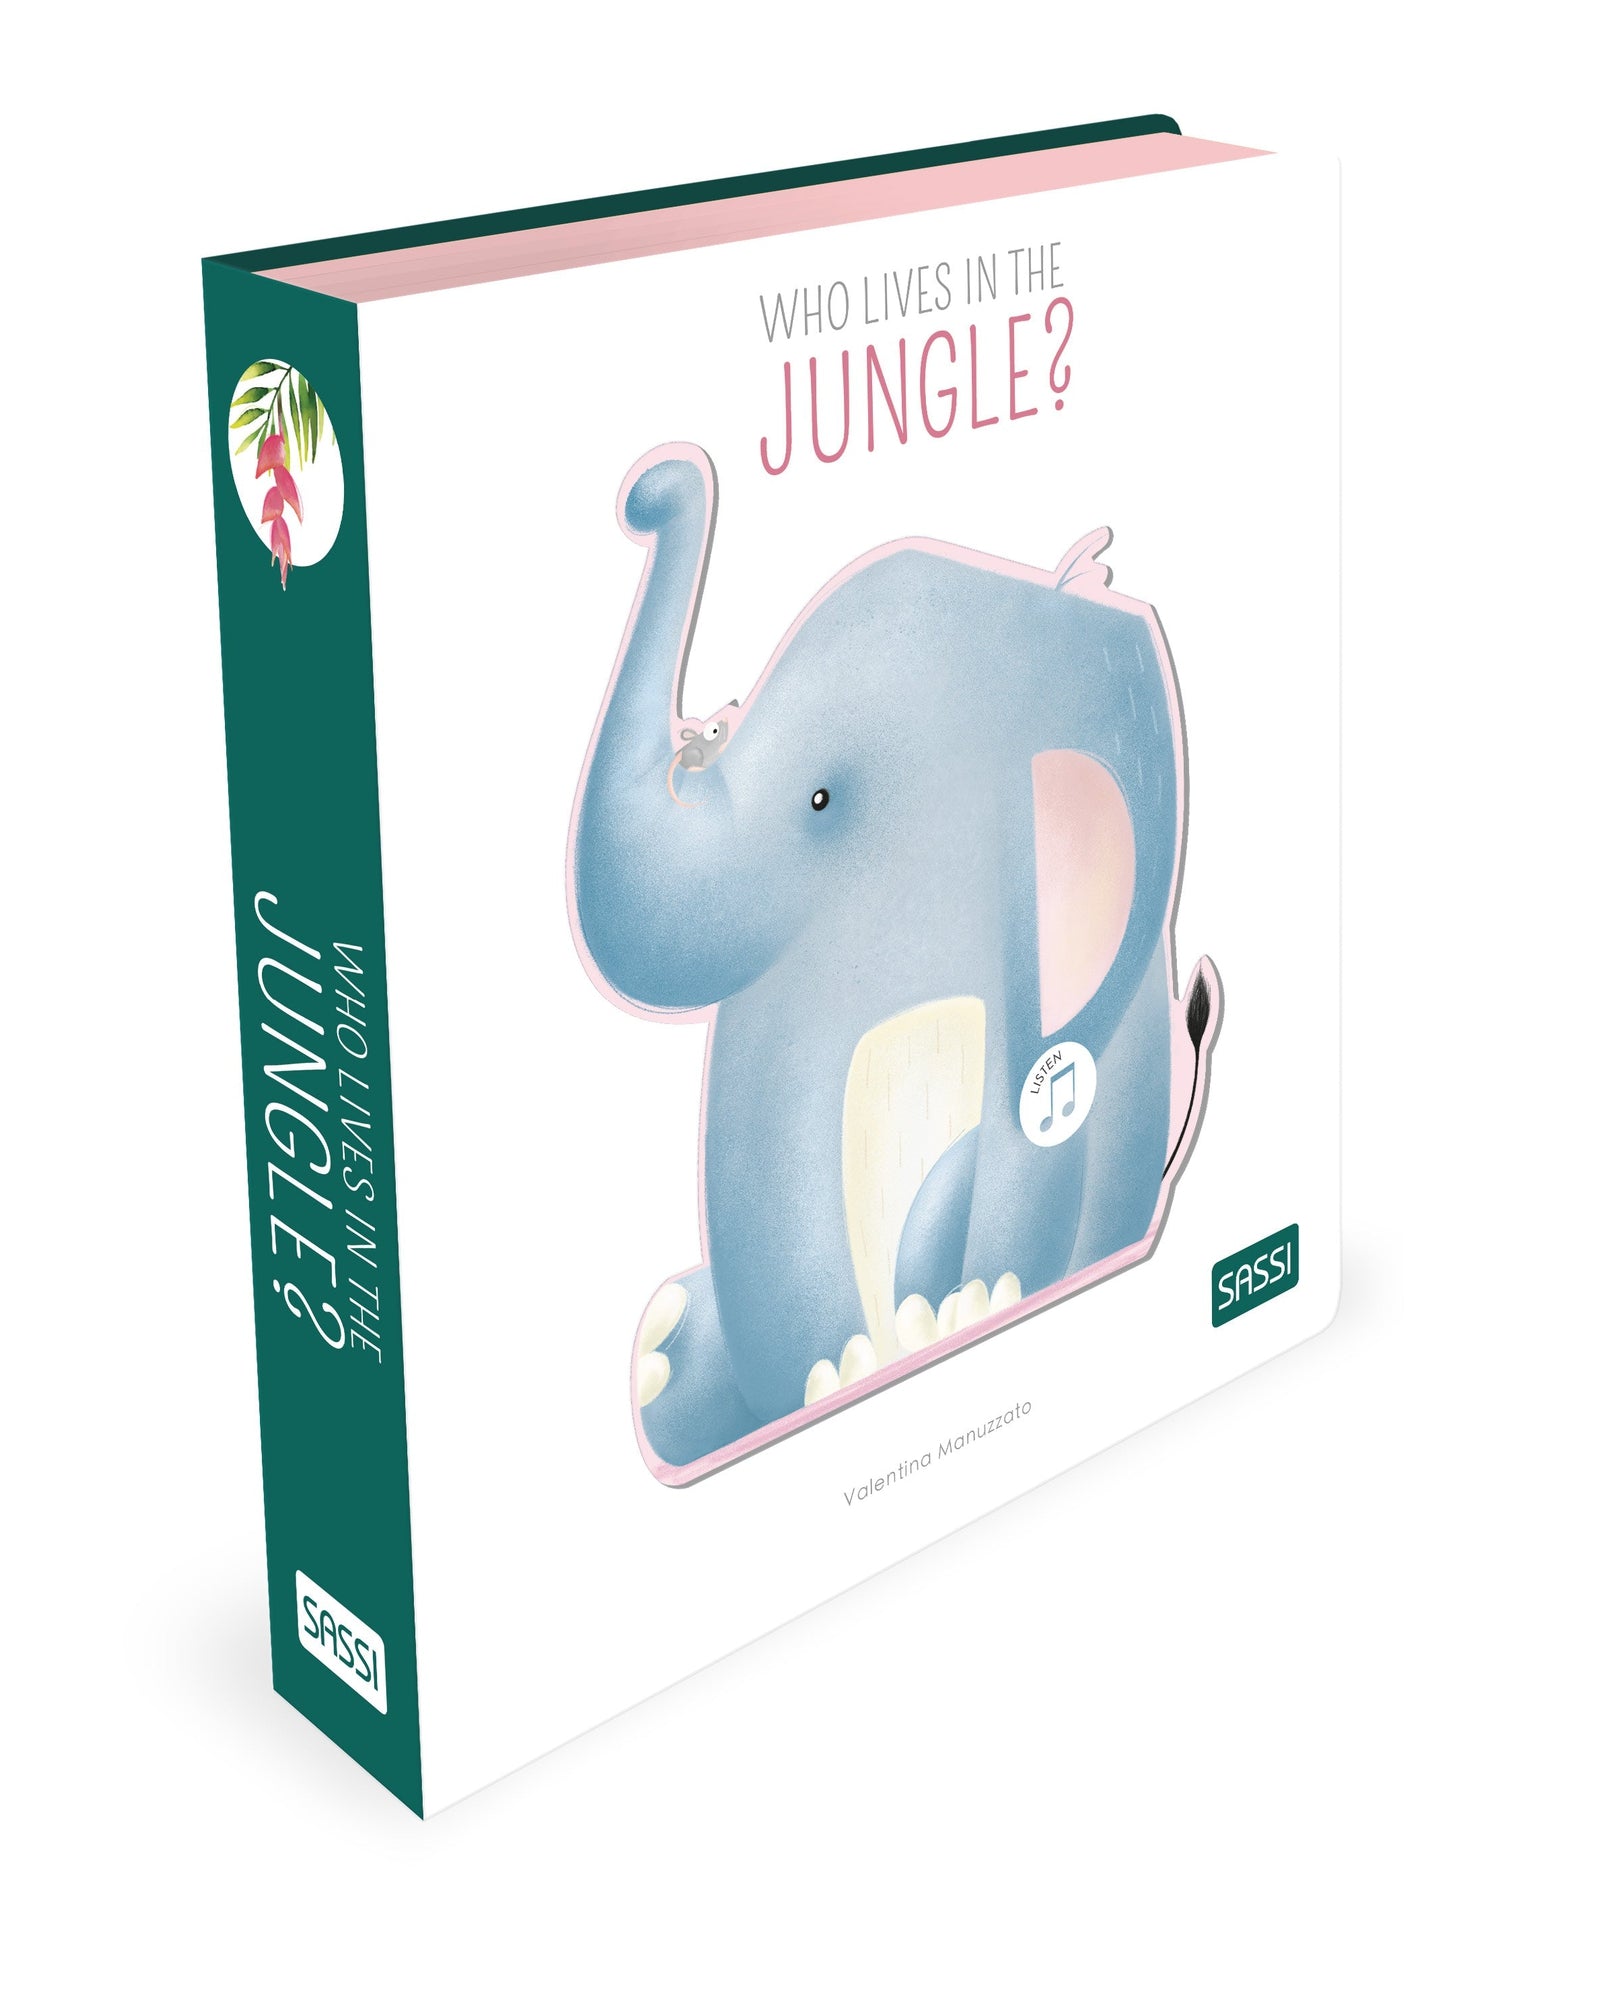 —　Lives　Book　Sassi　Jungle?　the　in　Who　Sound　Kidstuff